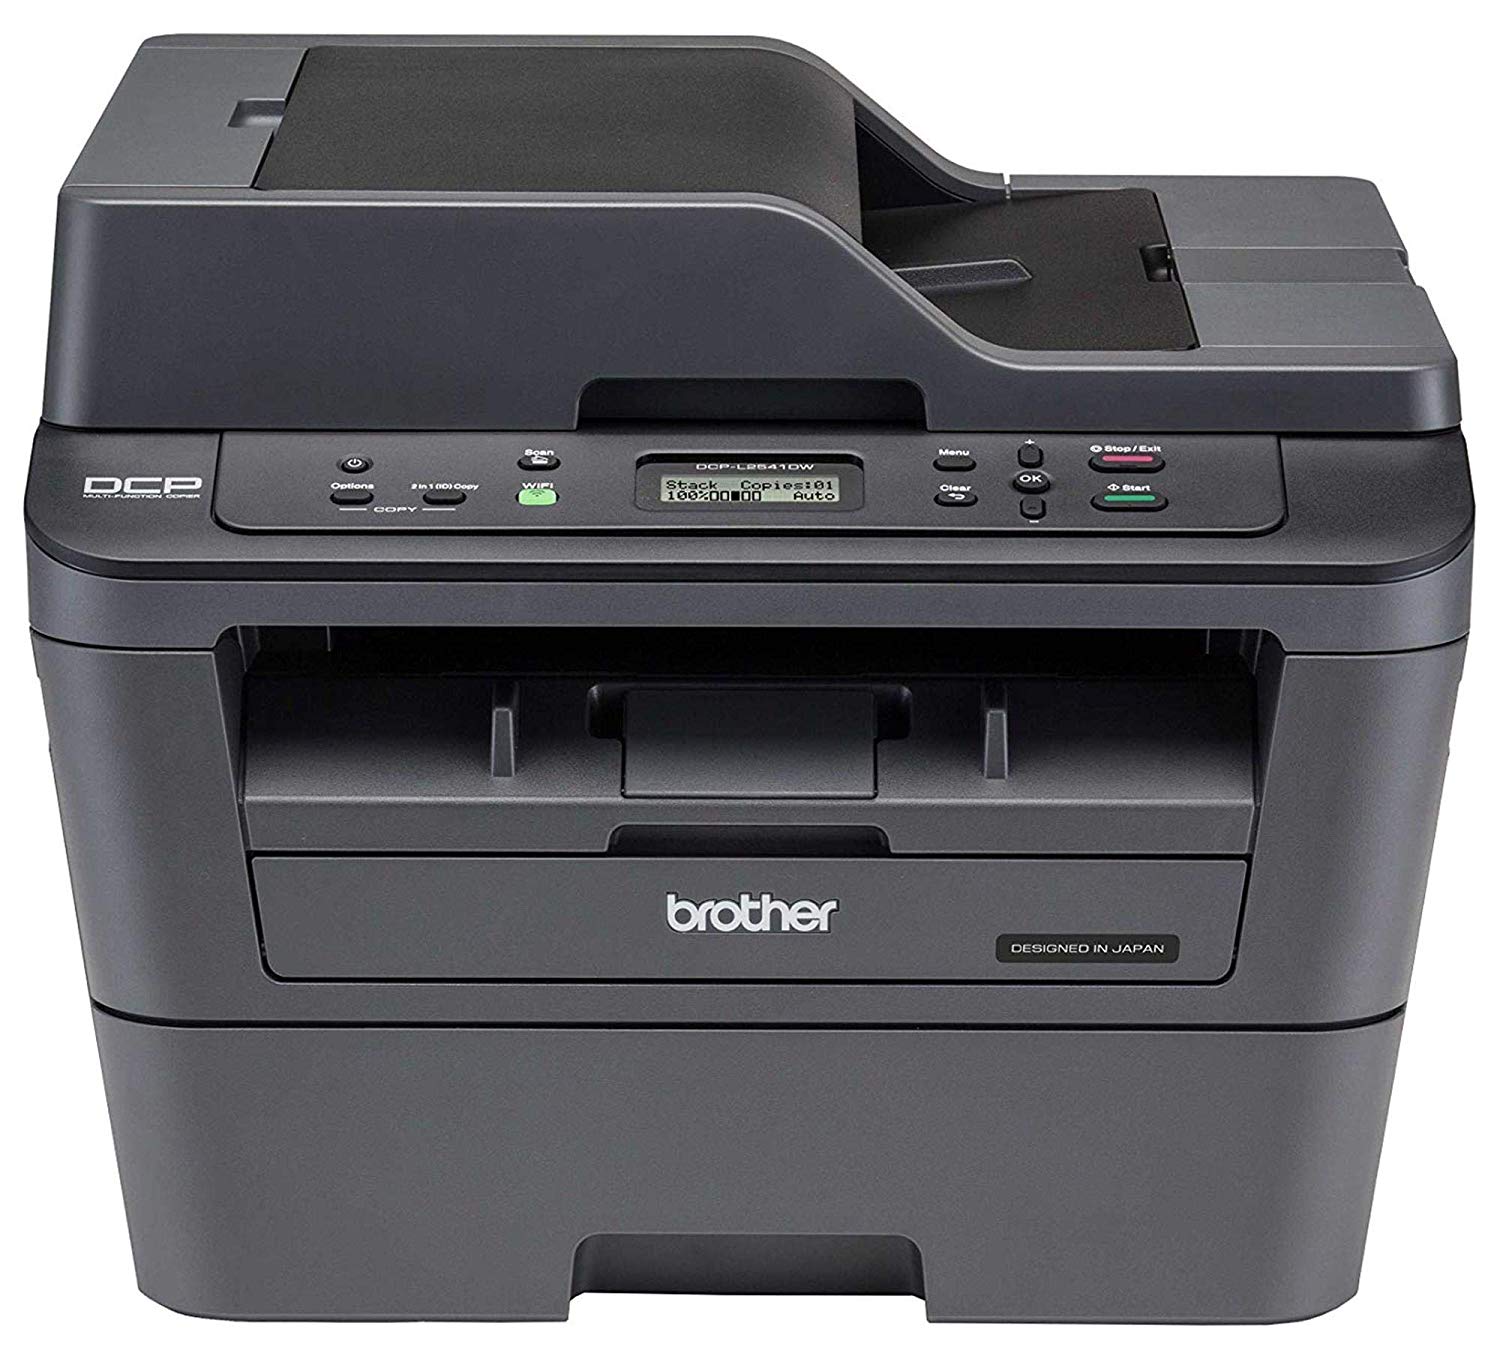 brother-monocrom-laser-multi-function-printer-dcp-l2541dw-print-scan